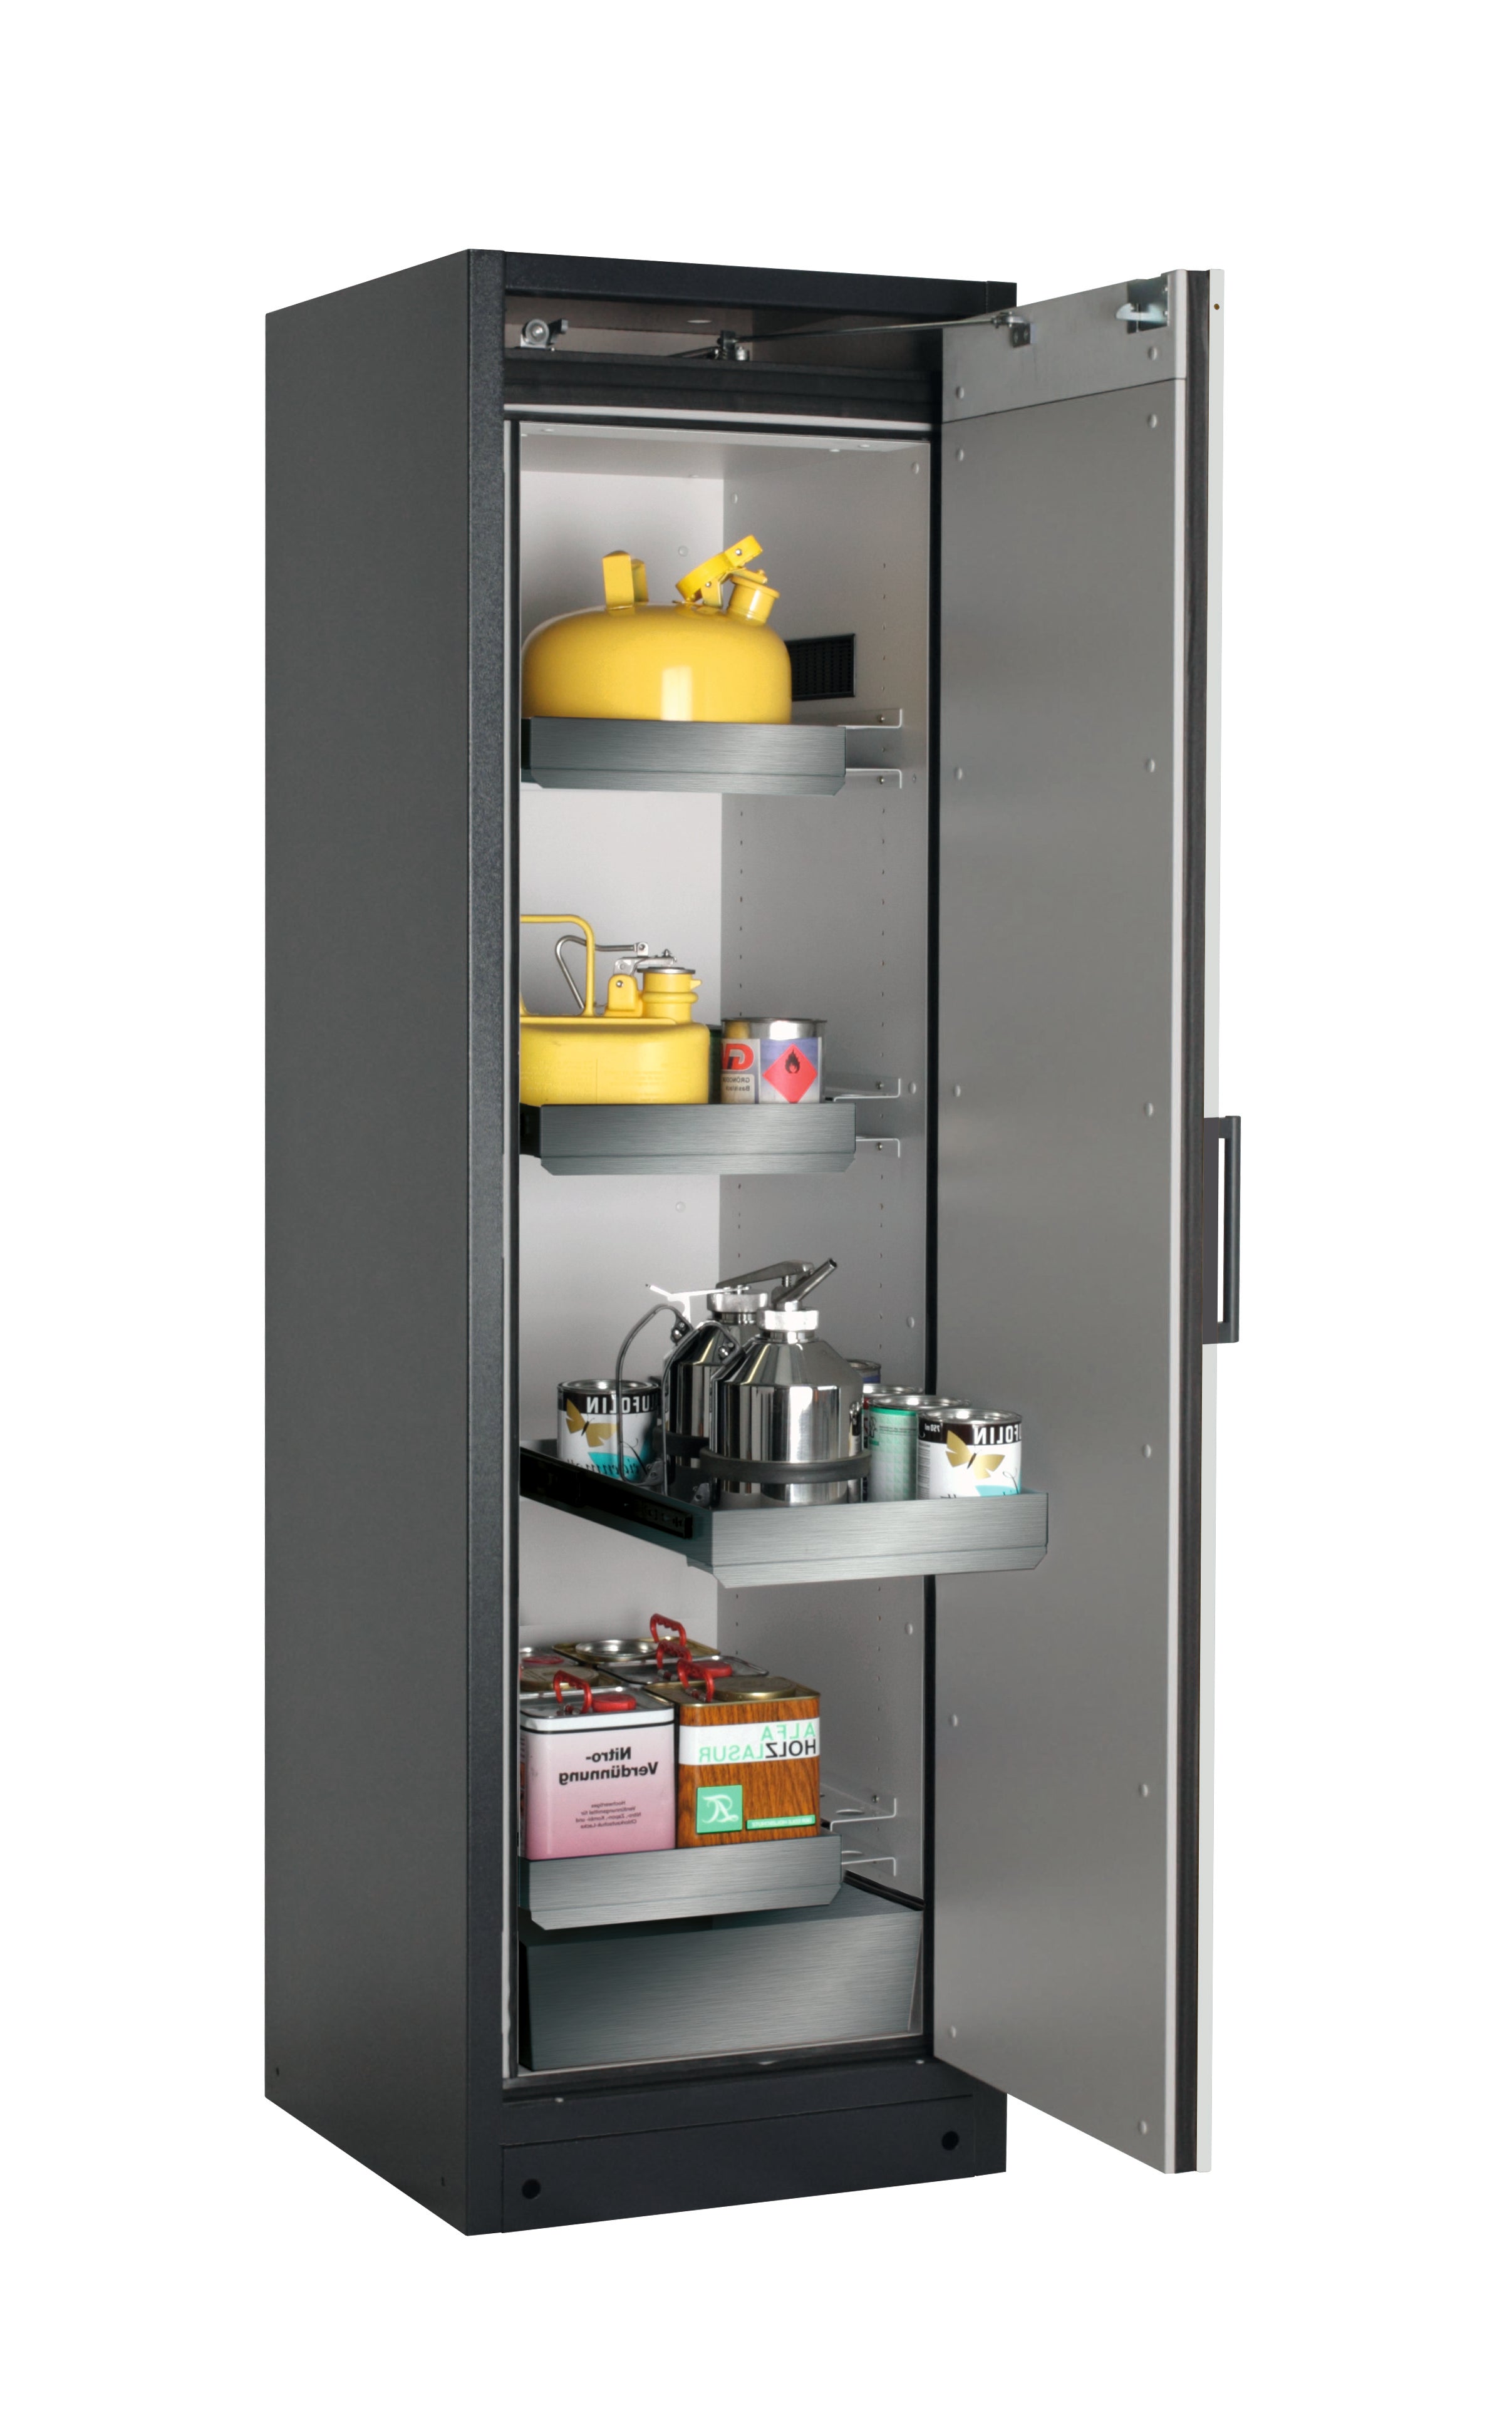 Type 90 safety storage cabinet Q-CLASSIC-90 model Q90.195.060.R in light grey RAL 7035 with 3x drawer (standard) (stainless steel 1.4301),